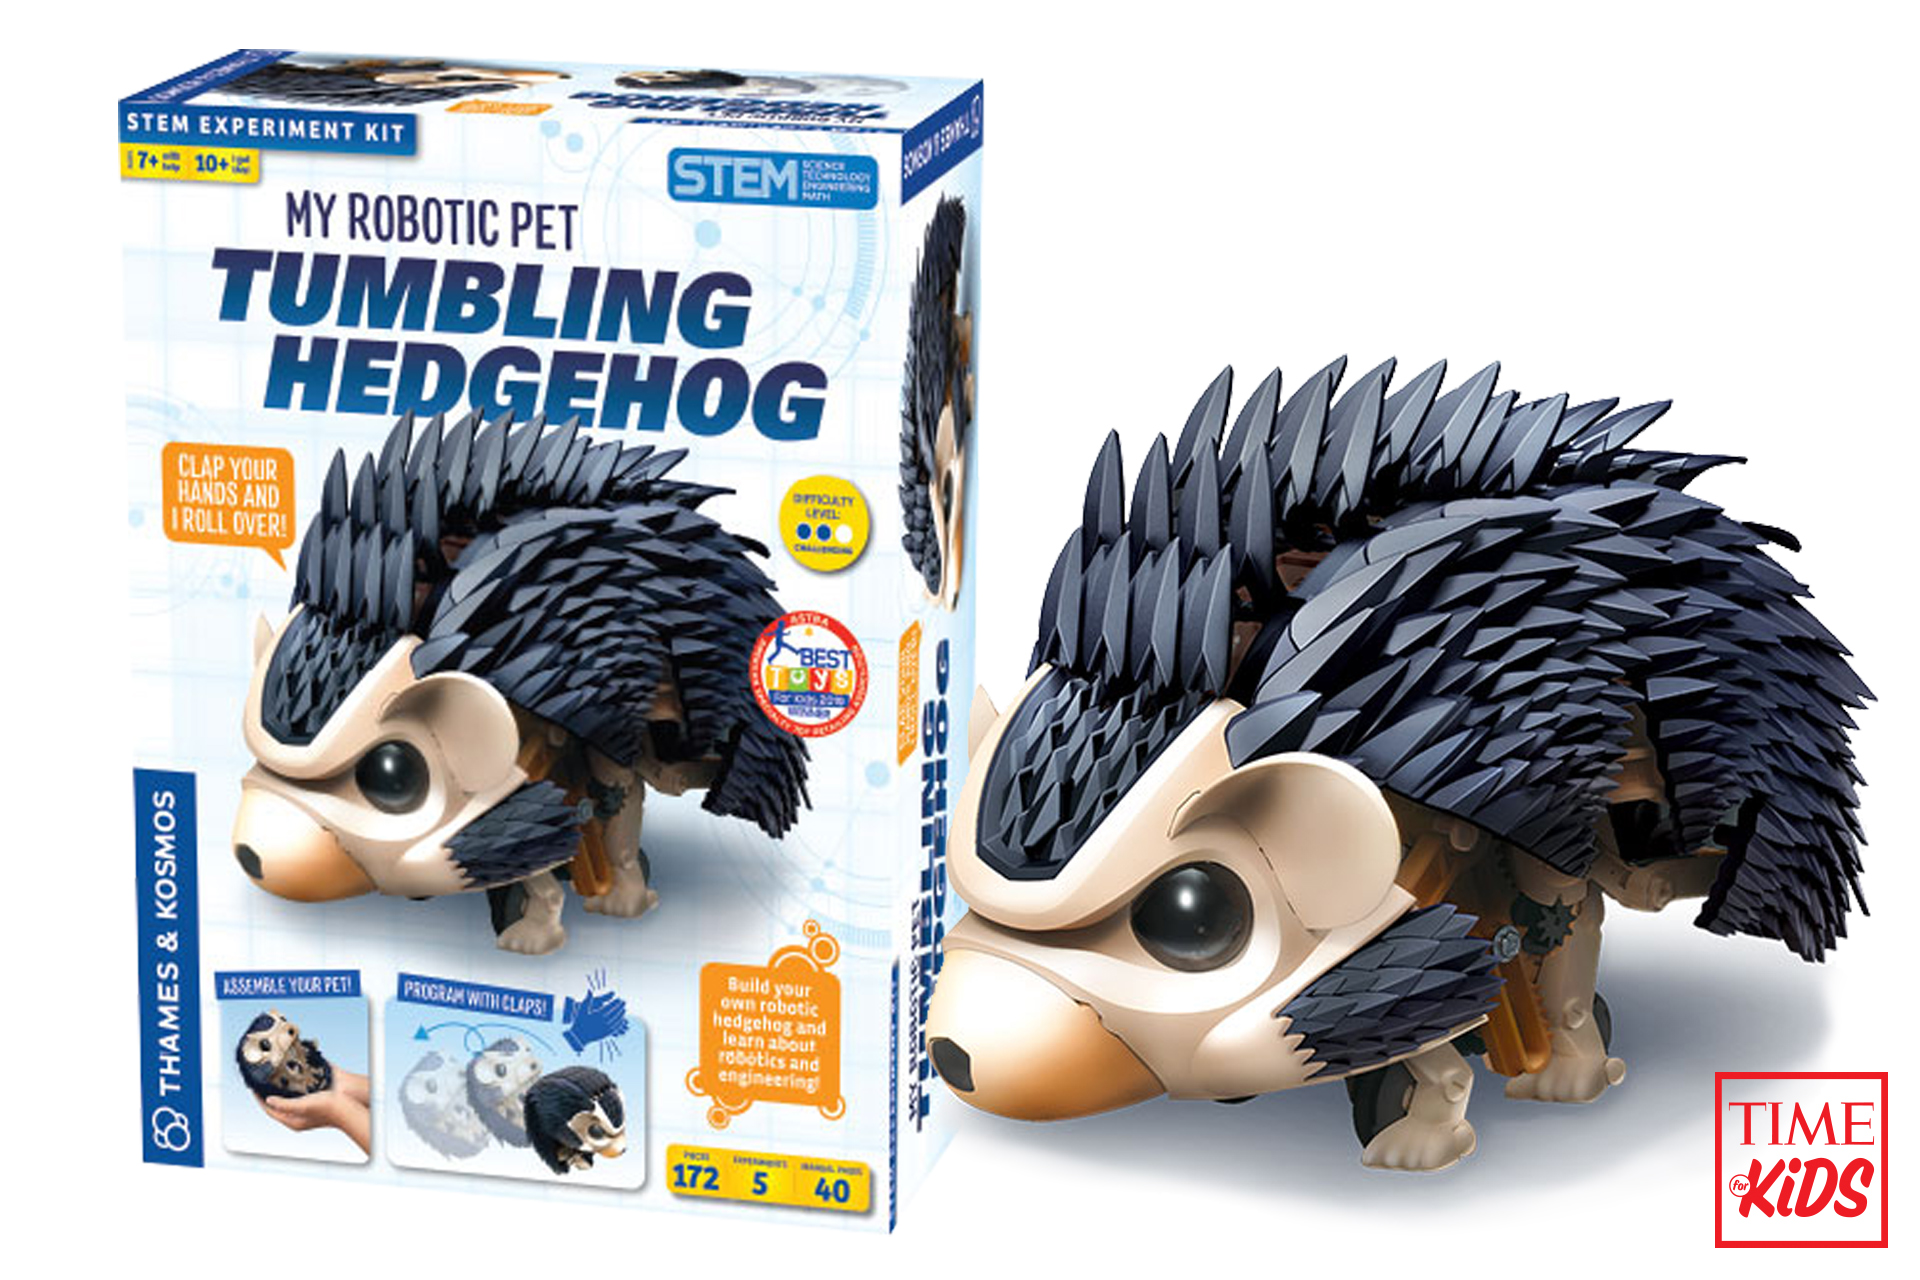 Picture of tumbling hedgehog for toy guide.